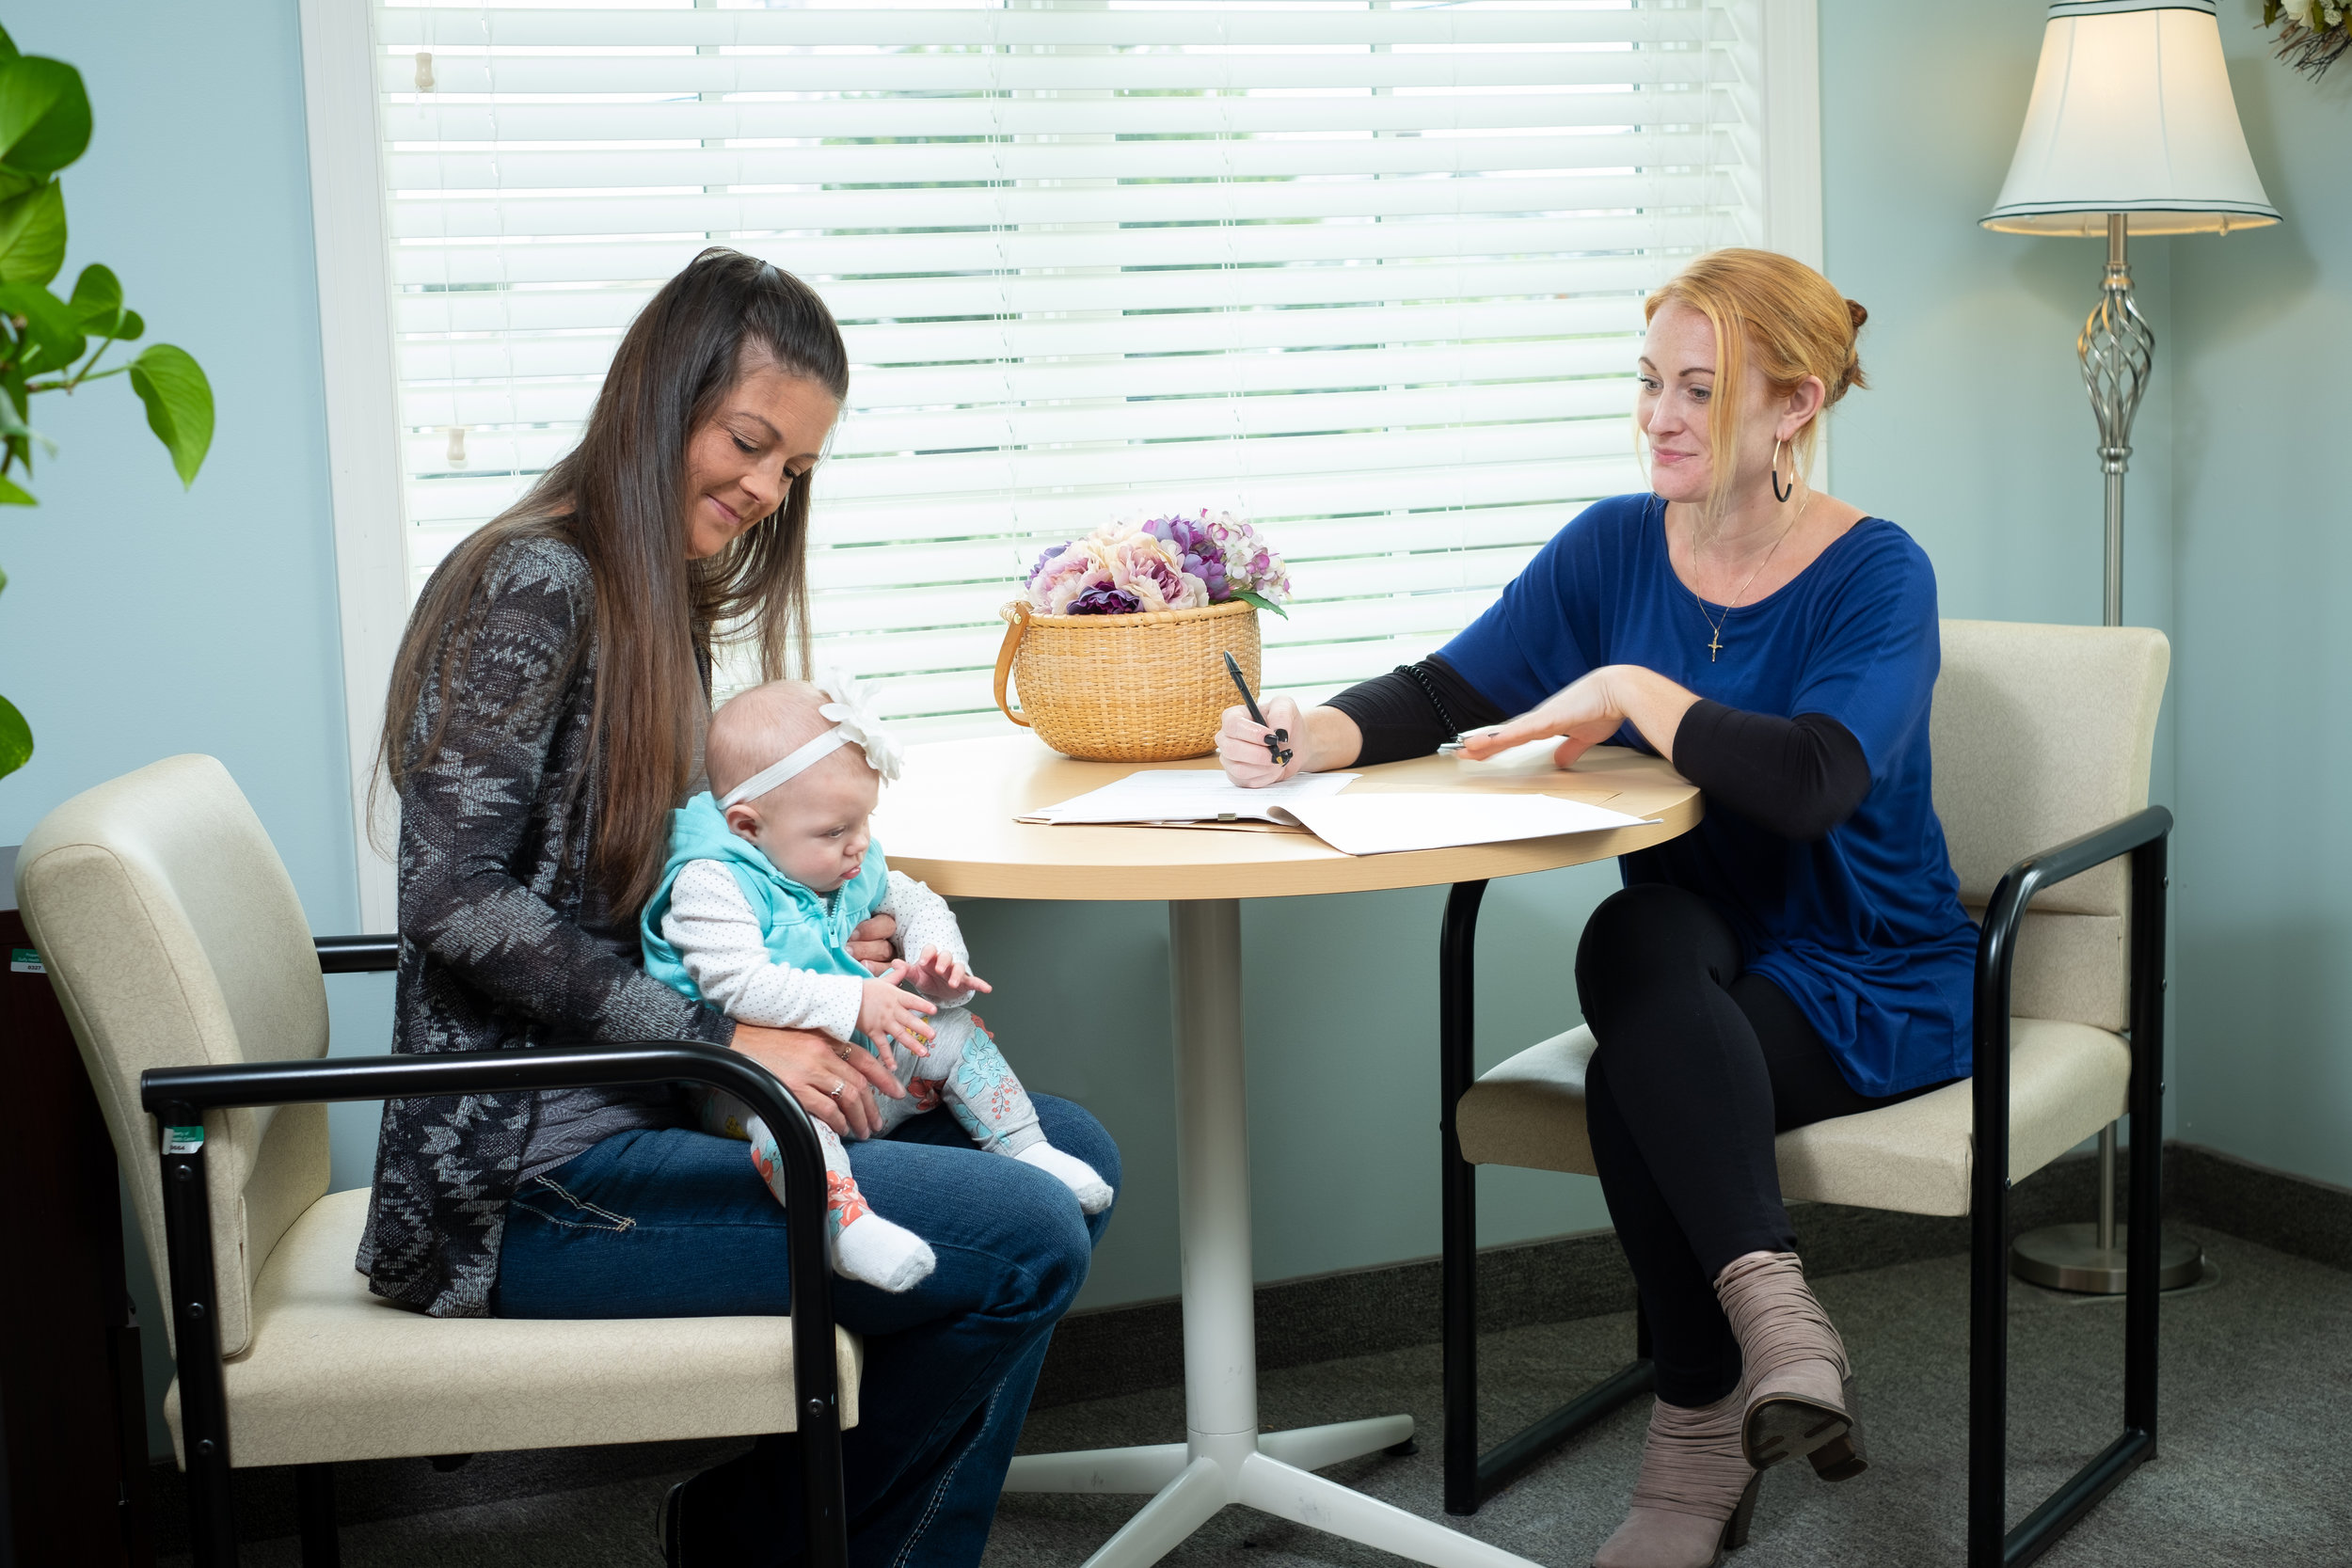 Peer Recovery Coach Sarah meets with a client and her baby.